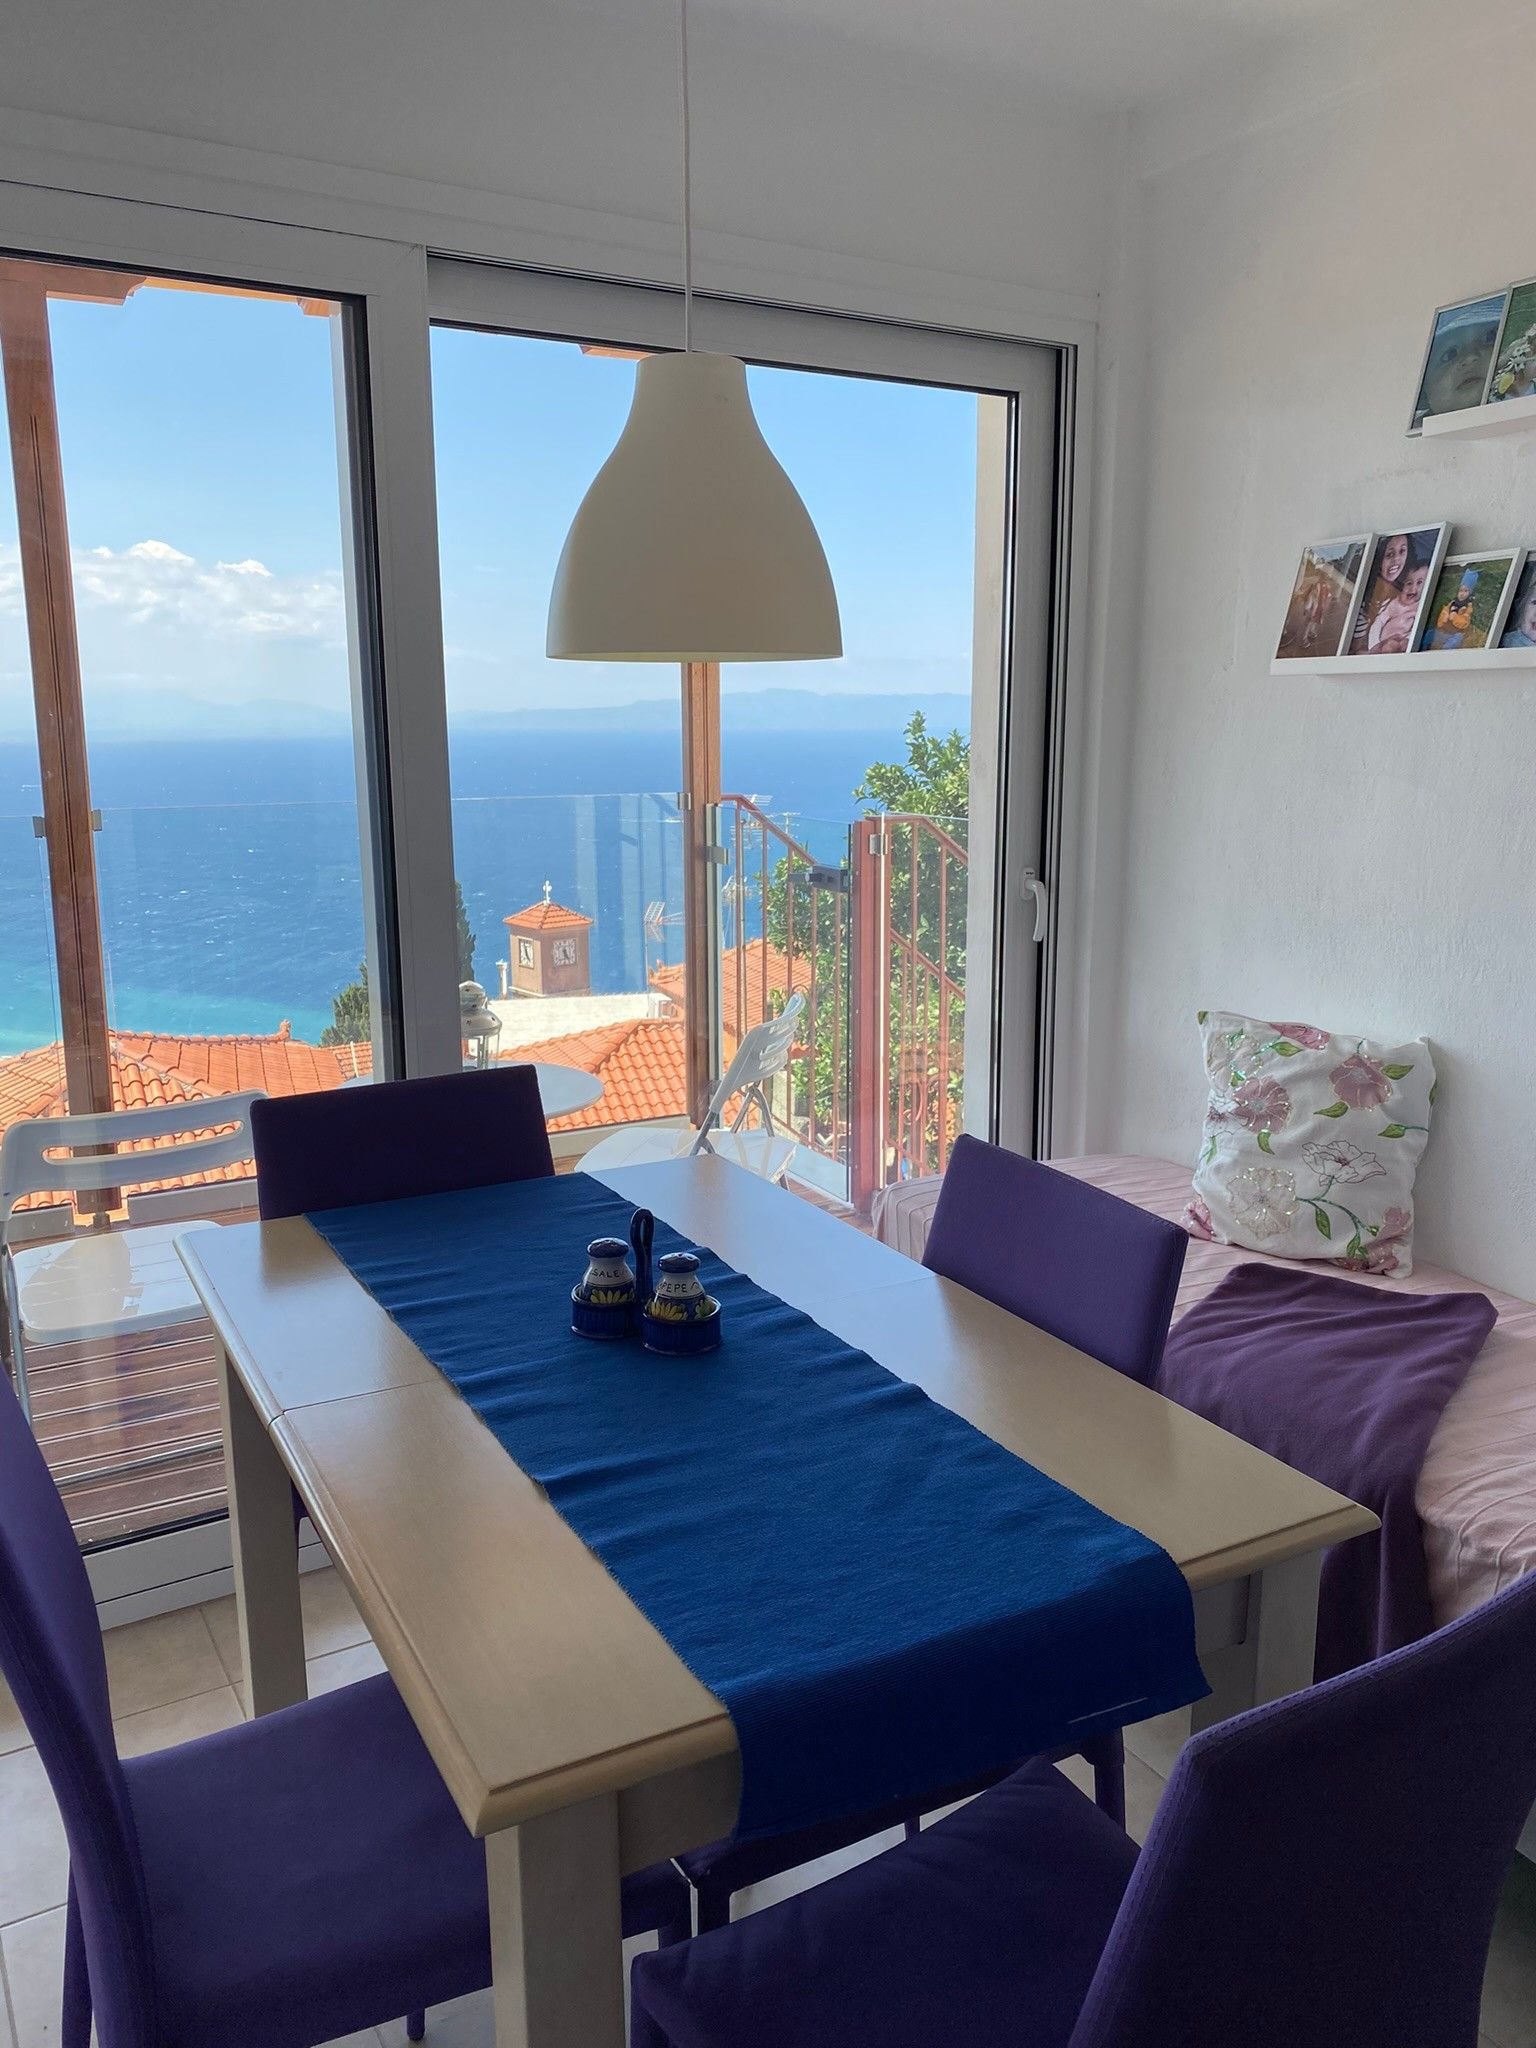 spacious_house_with_amazing_view_in_glossa_blue_table_cloth.jpeg